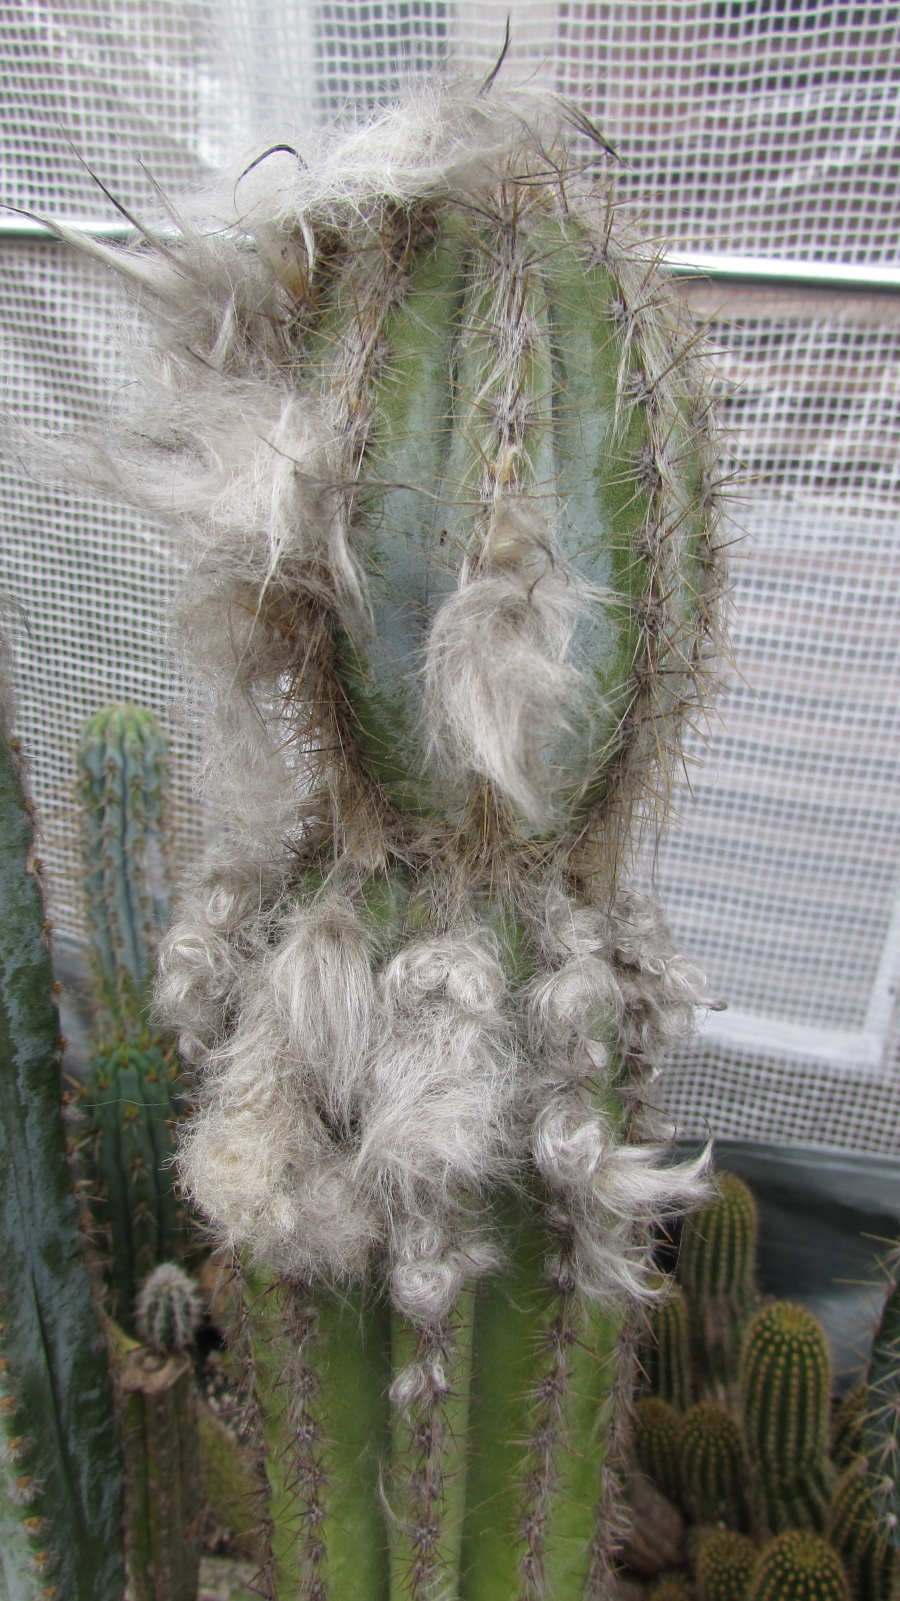 Pilosocereus produce white hair when they are mature enough to flower